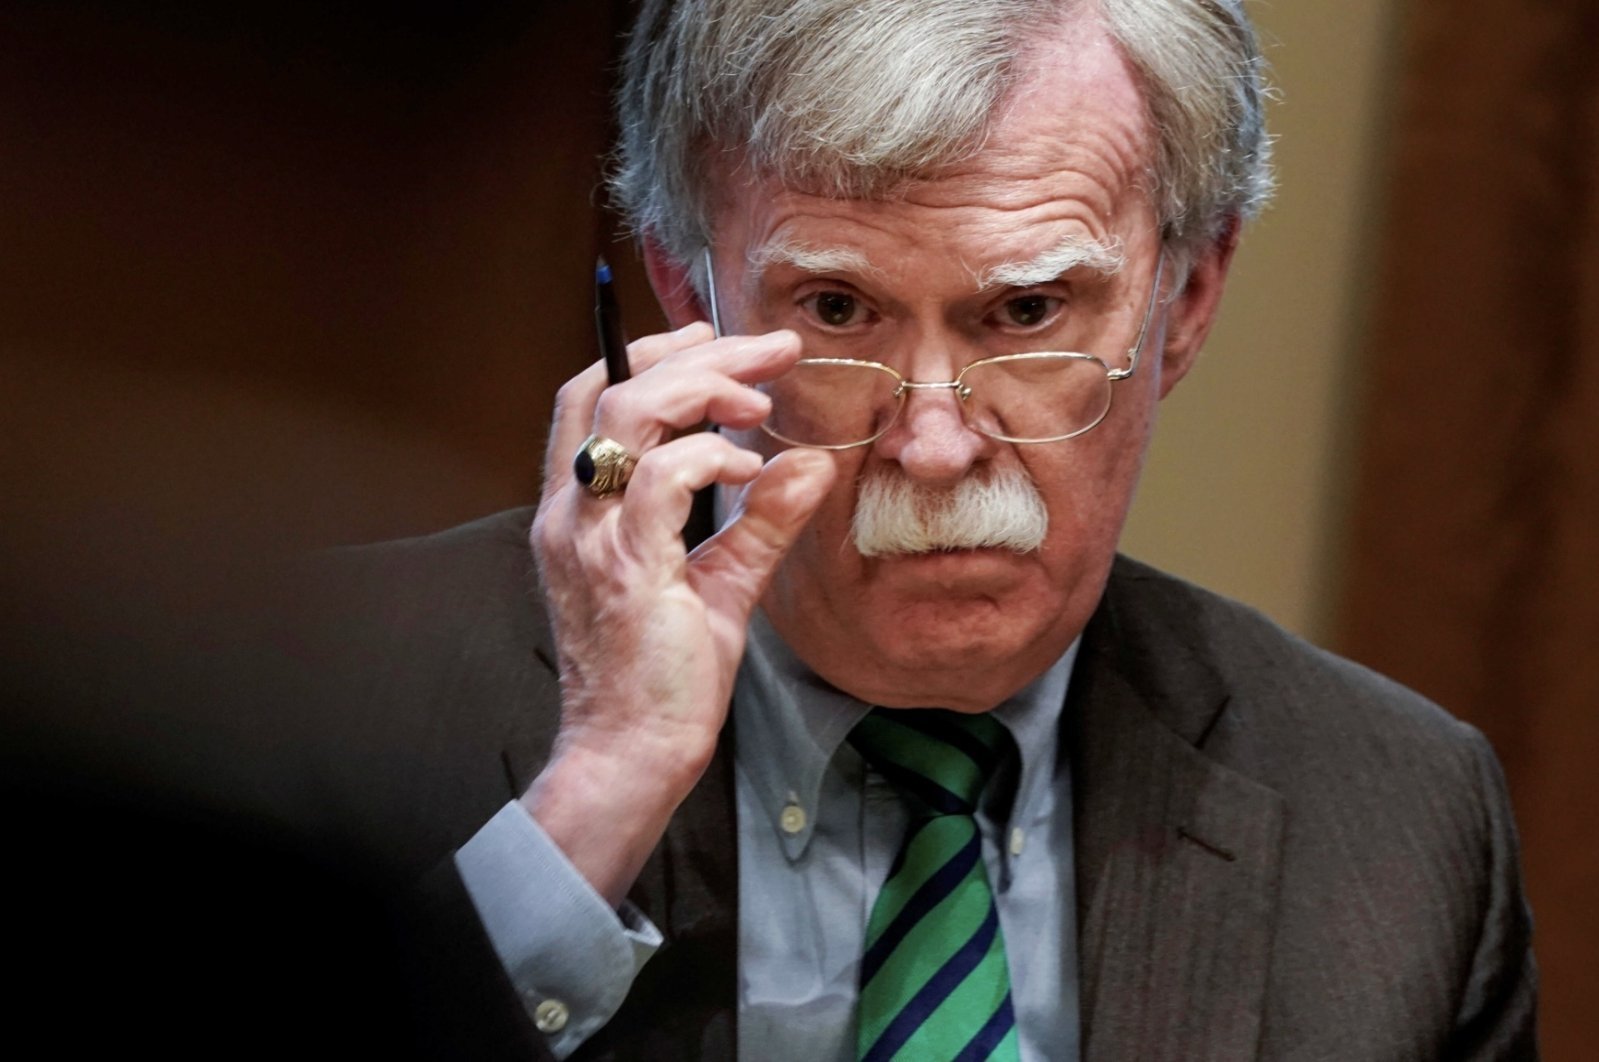 Former U.S. national security adviser John Bolton adjusts his glasses during an Oval Office meeting at the White House in Washington, D.C., U.S., April 2, 2019. (Reuters Photo)